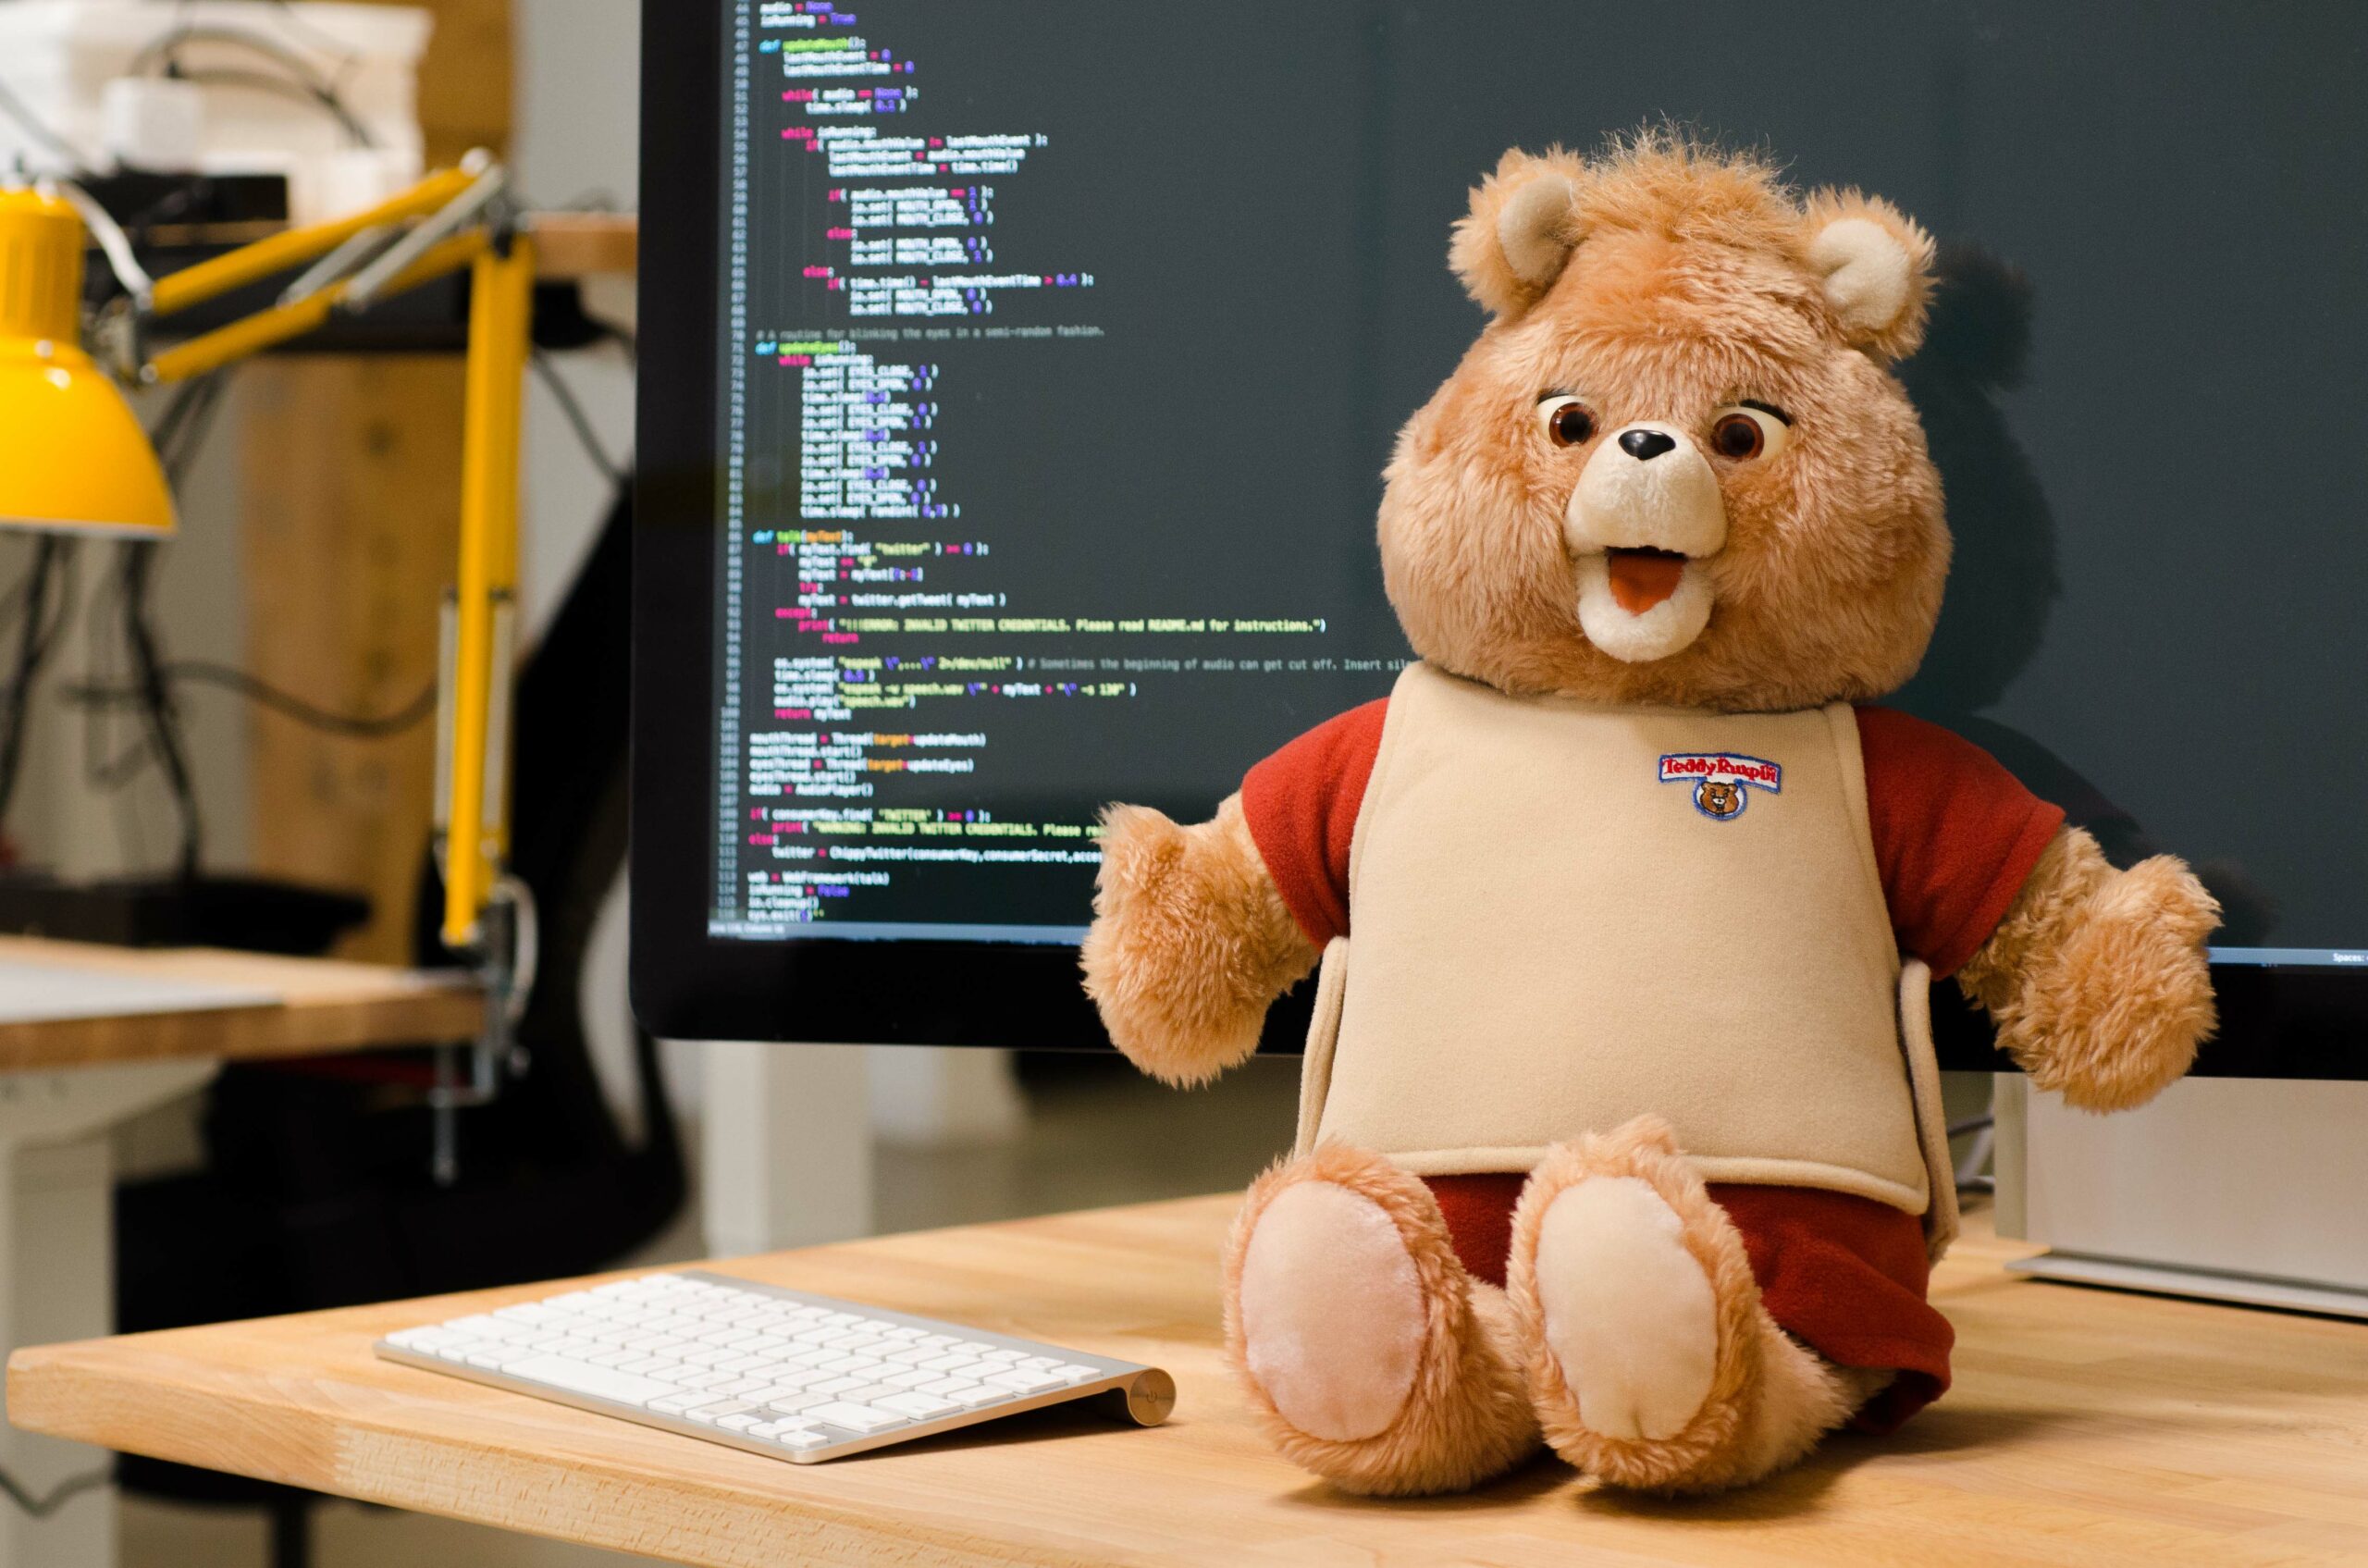 Hack A Teddy Bear To Say Anything